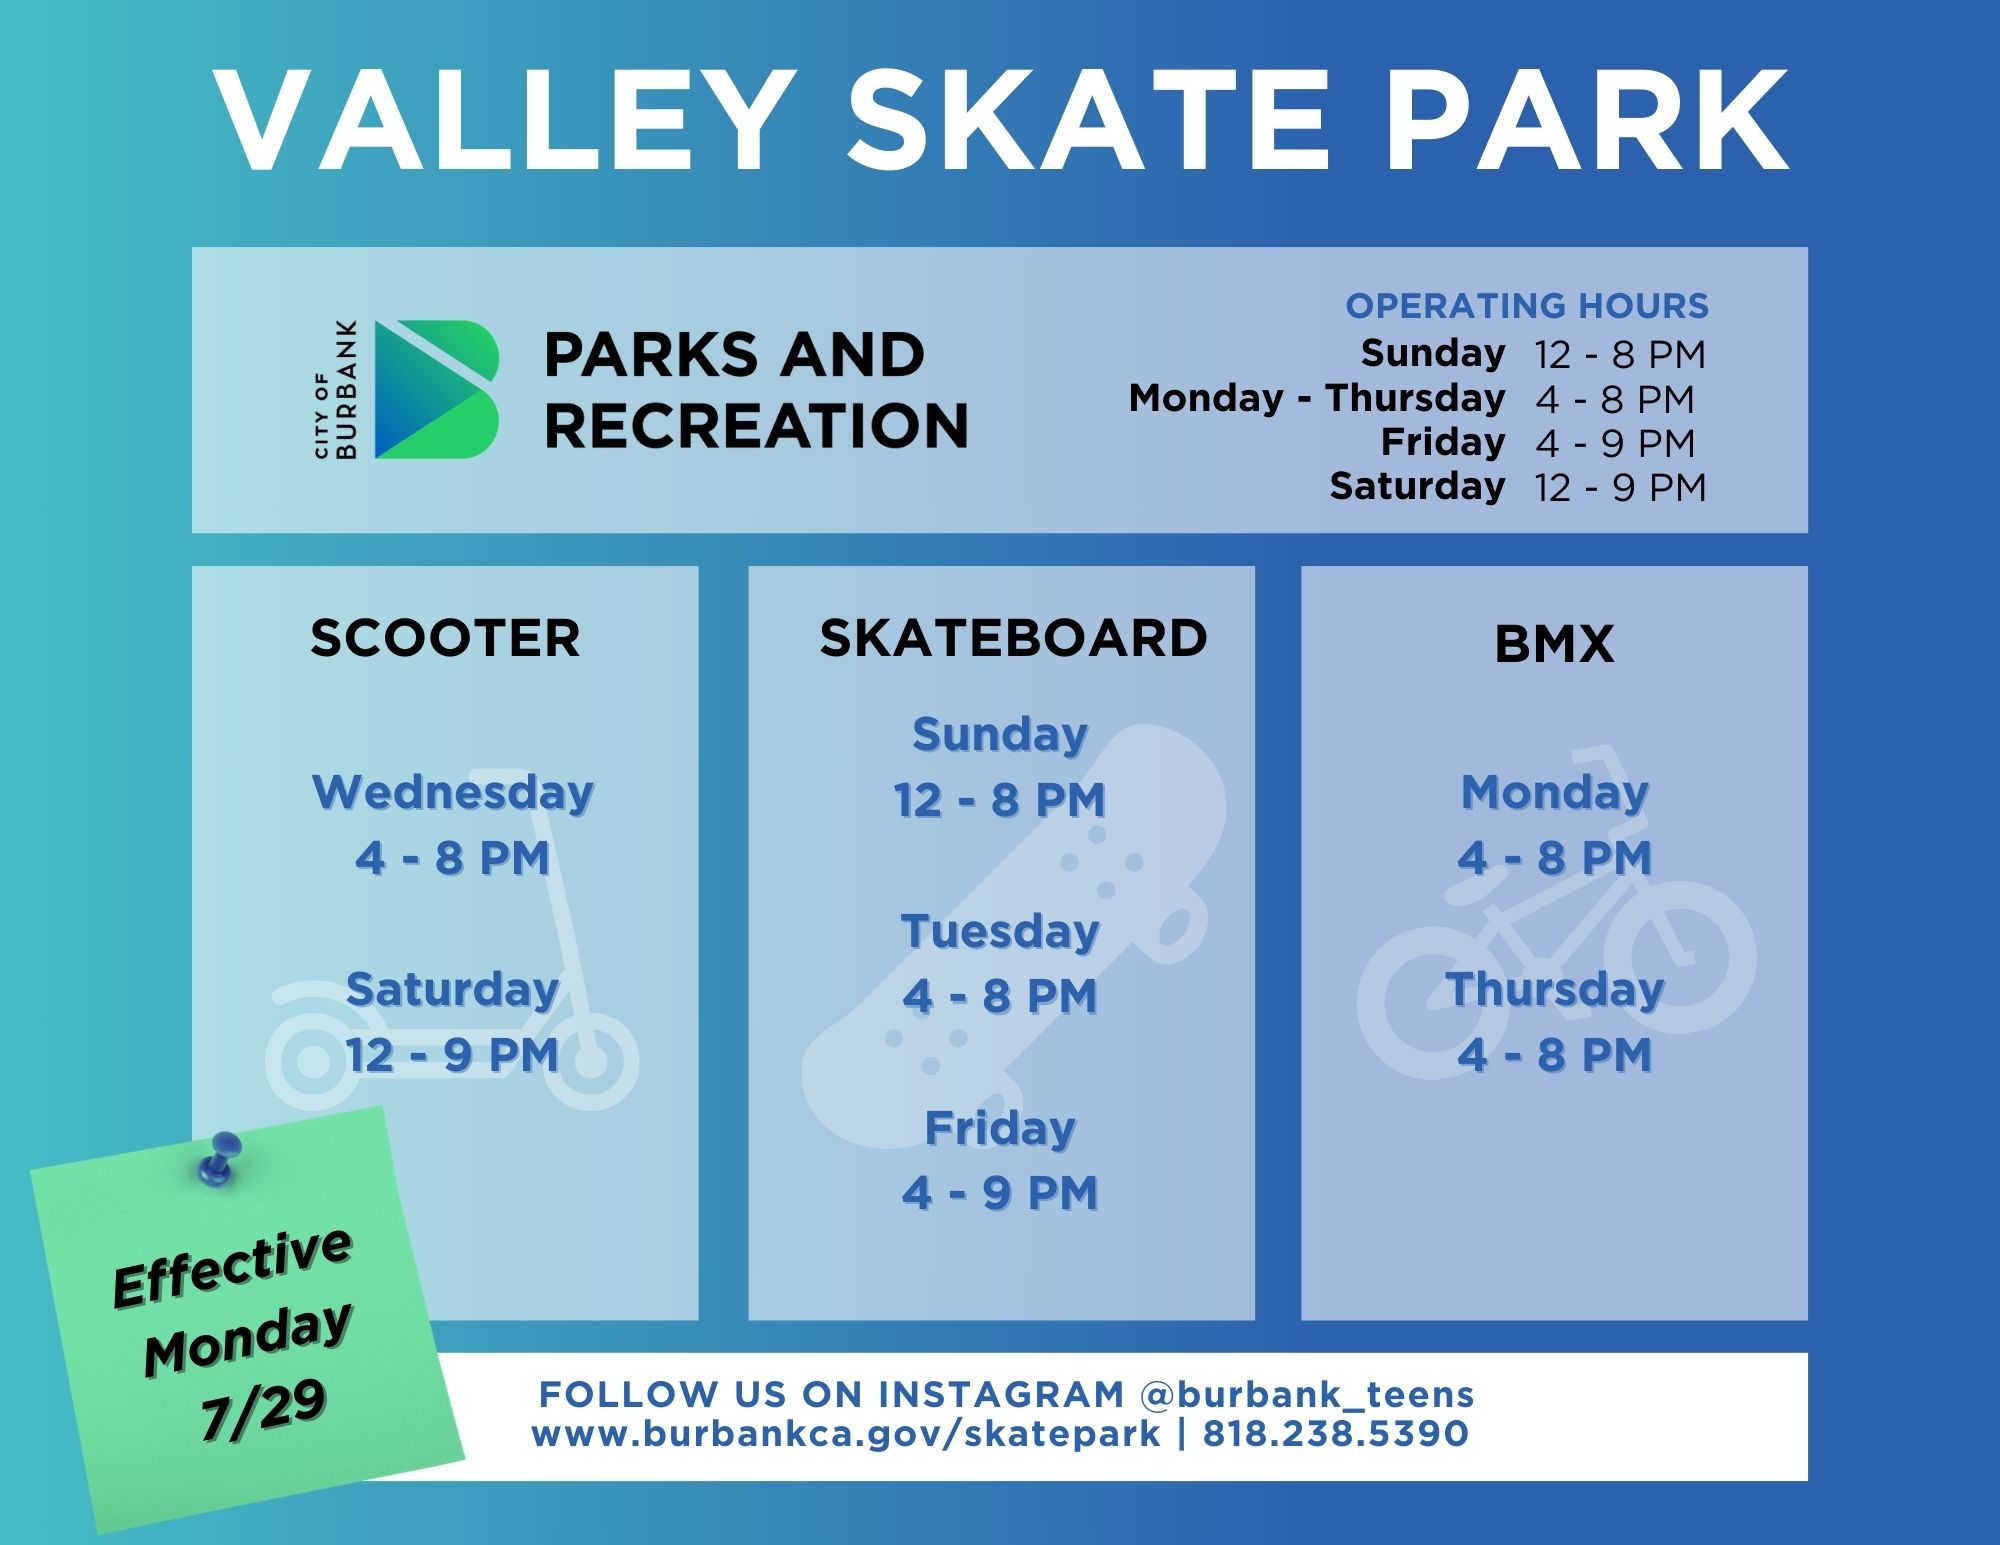 Valley Skate Park Summer Hours 2024 City of Burbank Parks and Recreation Operating Hours Sunday 12 - 8PM Monday - Thursday 2 - 9 PM Friday 2-9 PM Saturday 12 - 9PM Scooter Wednesday and Saturday Skateboard Sunday Tuesday Friday BMX Monday and Thursday Follow Us On Instagram @burbank_teens www.burbankca.gov/skatepark | 818 238 5390